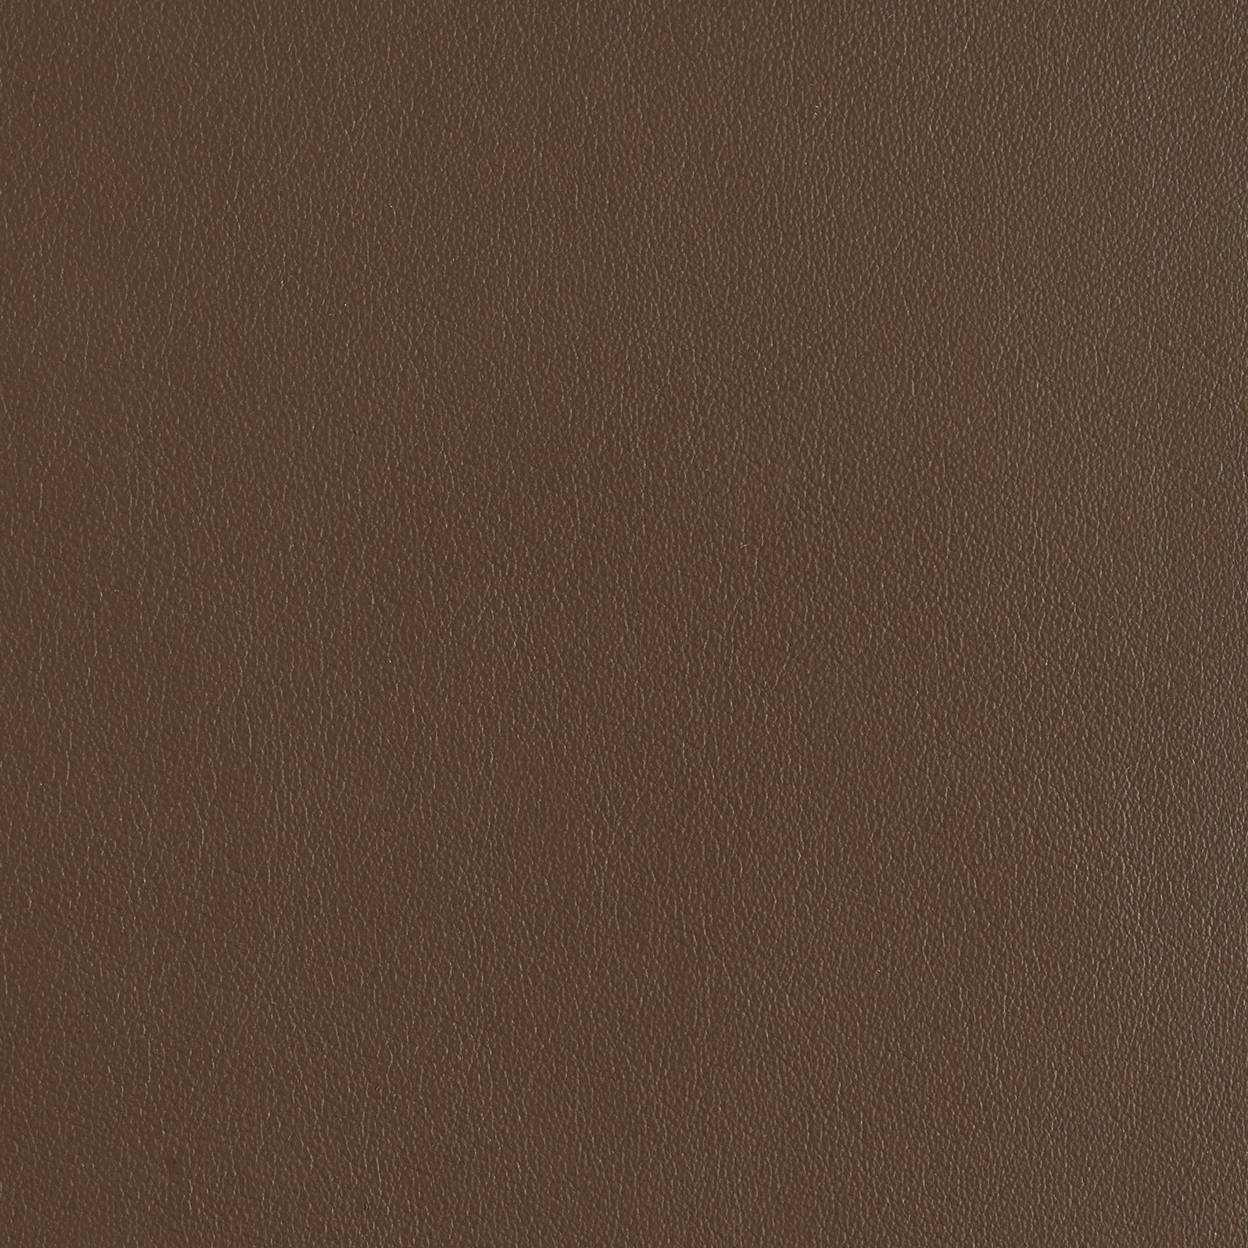 Truffle - Leather - Textiles - Materials - Herman Miller